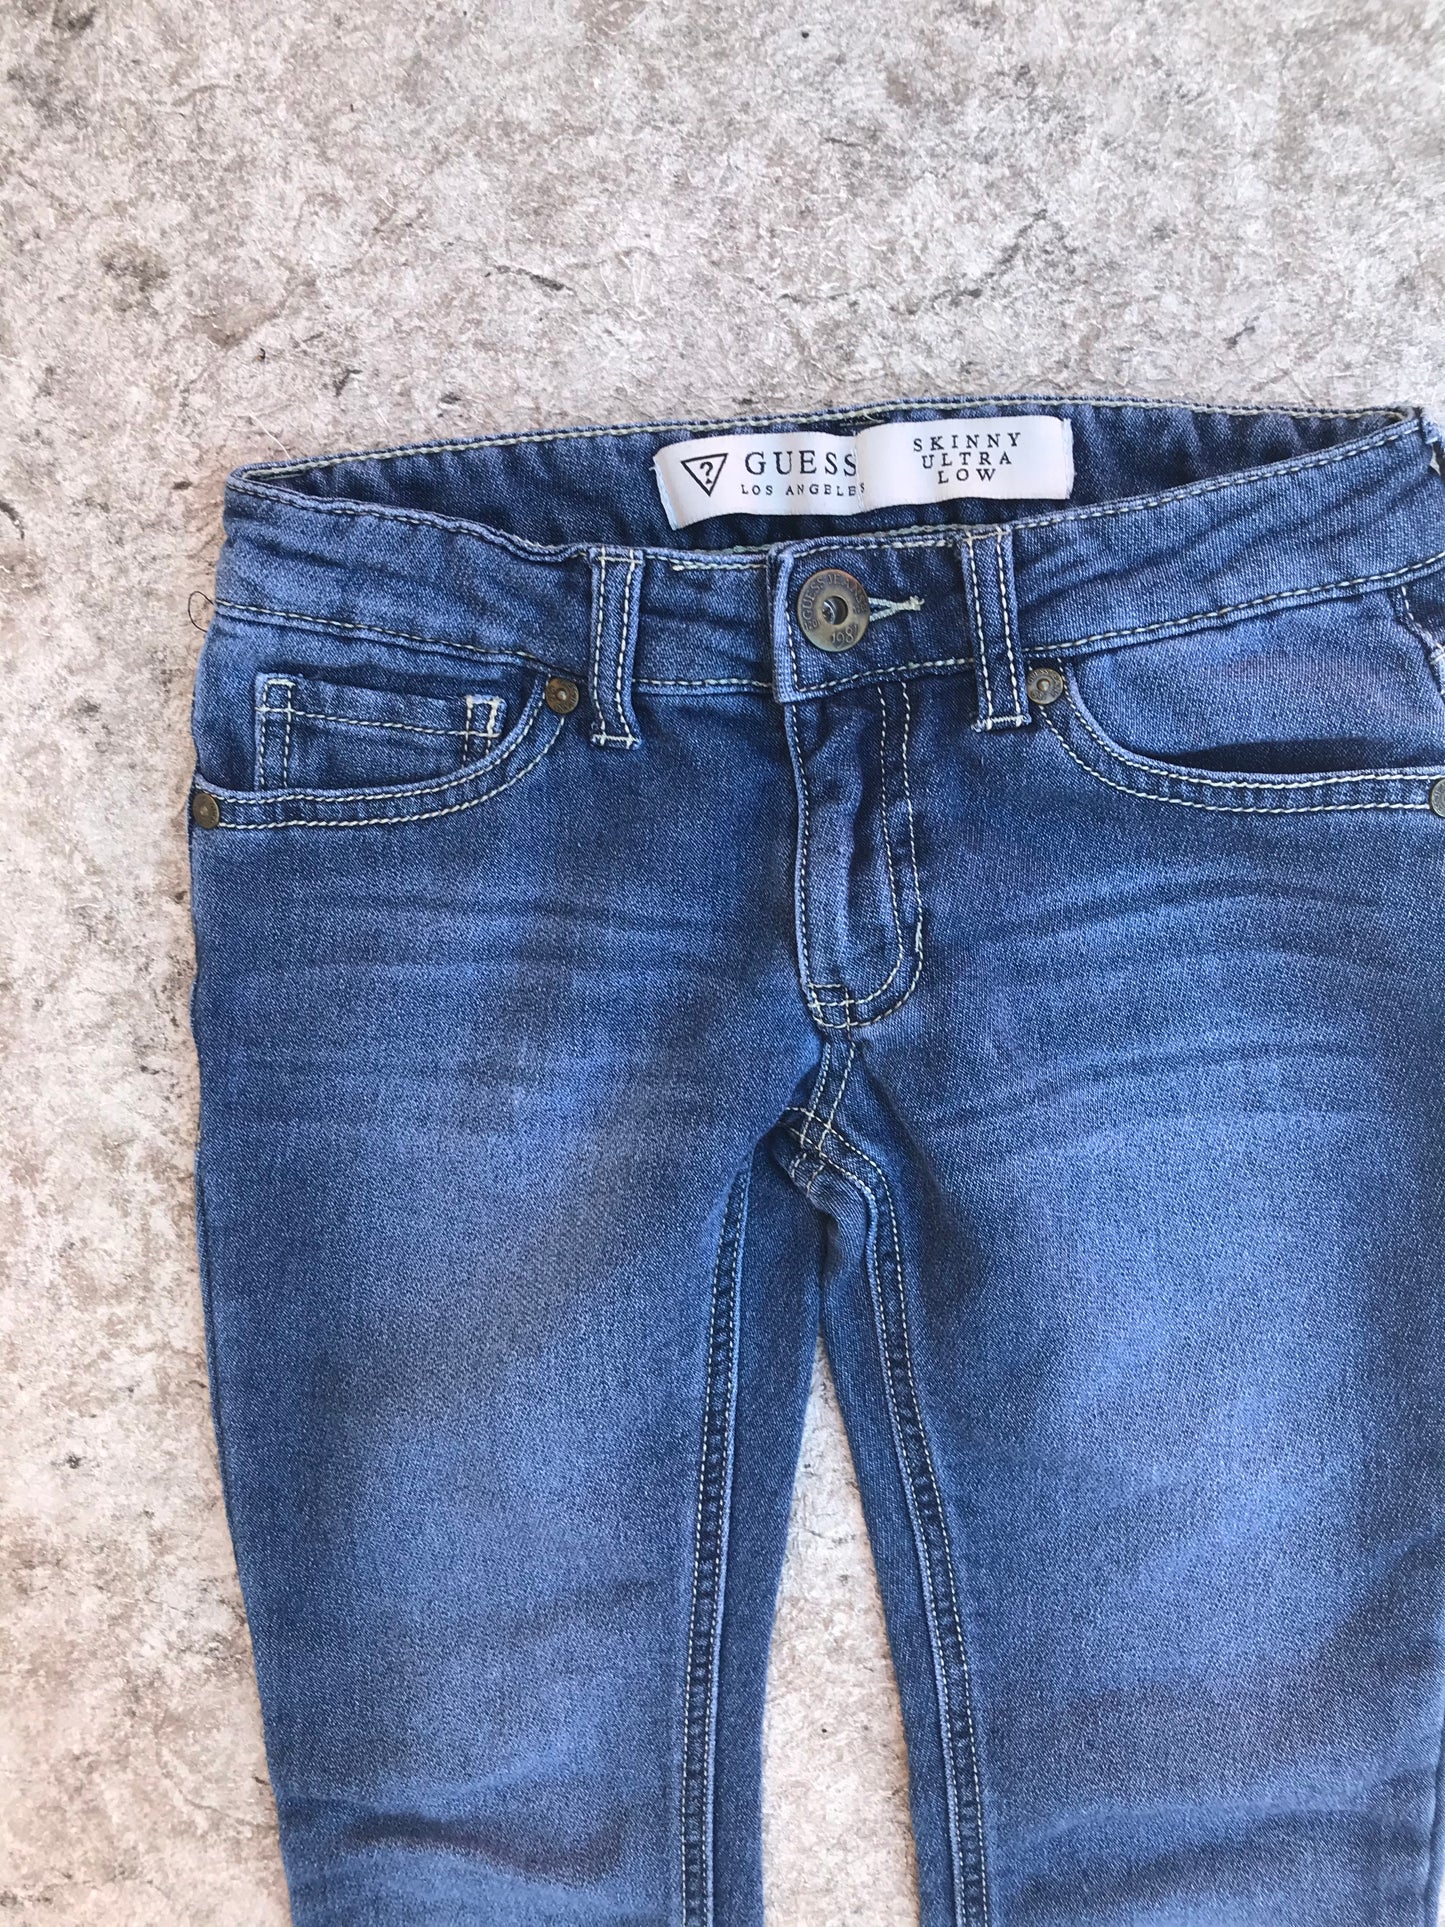 Pants Child Size 8 Guess Stretch Cotton Jeans Ultra Low As New